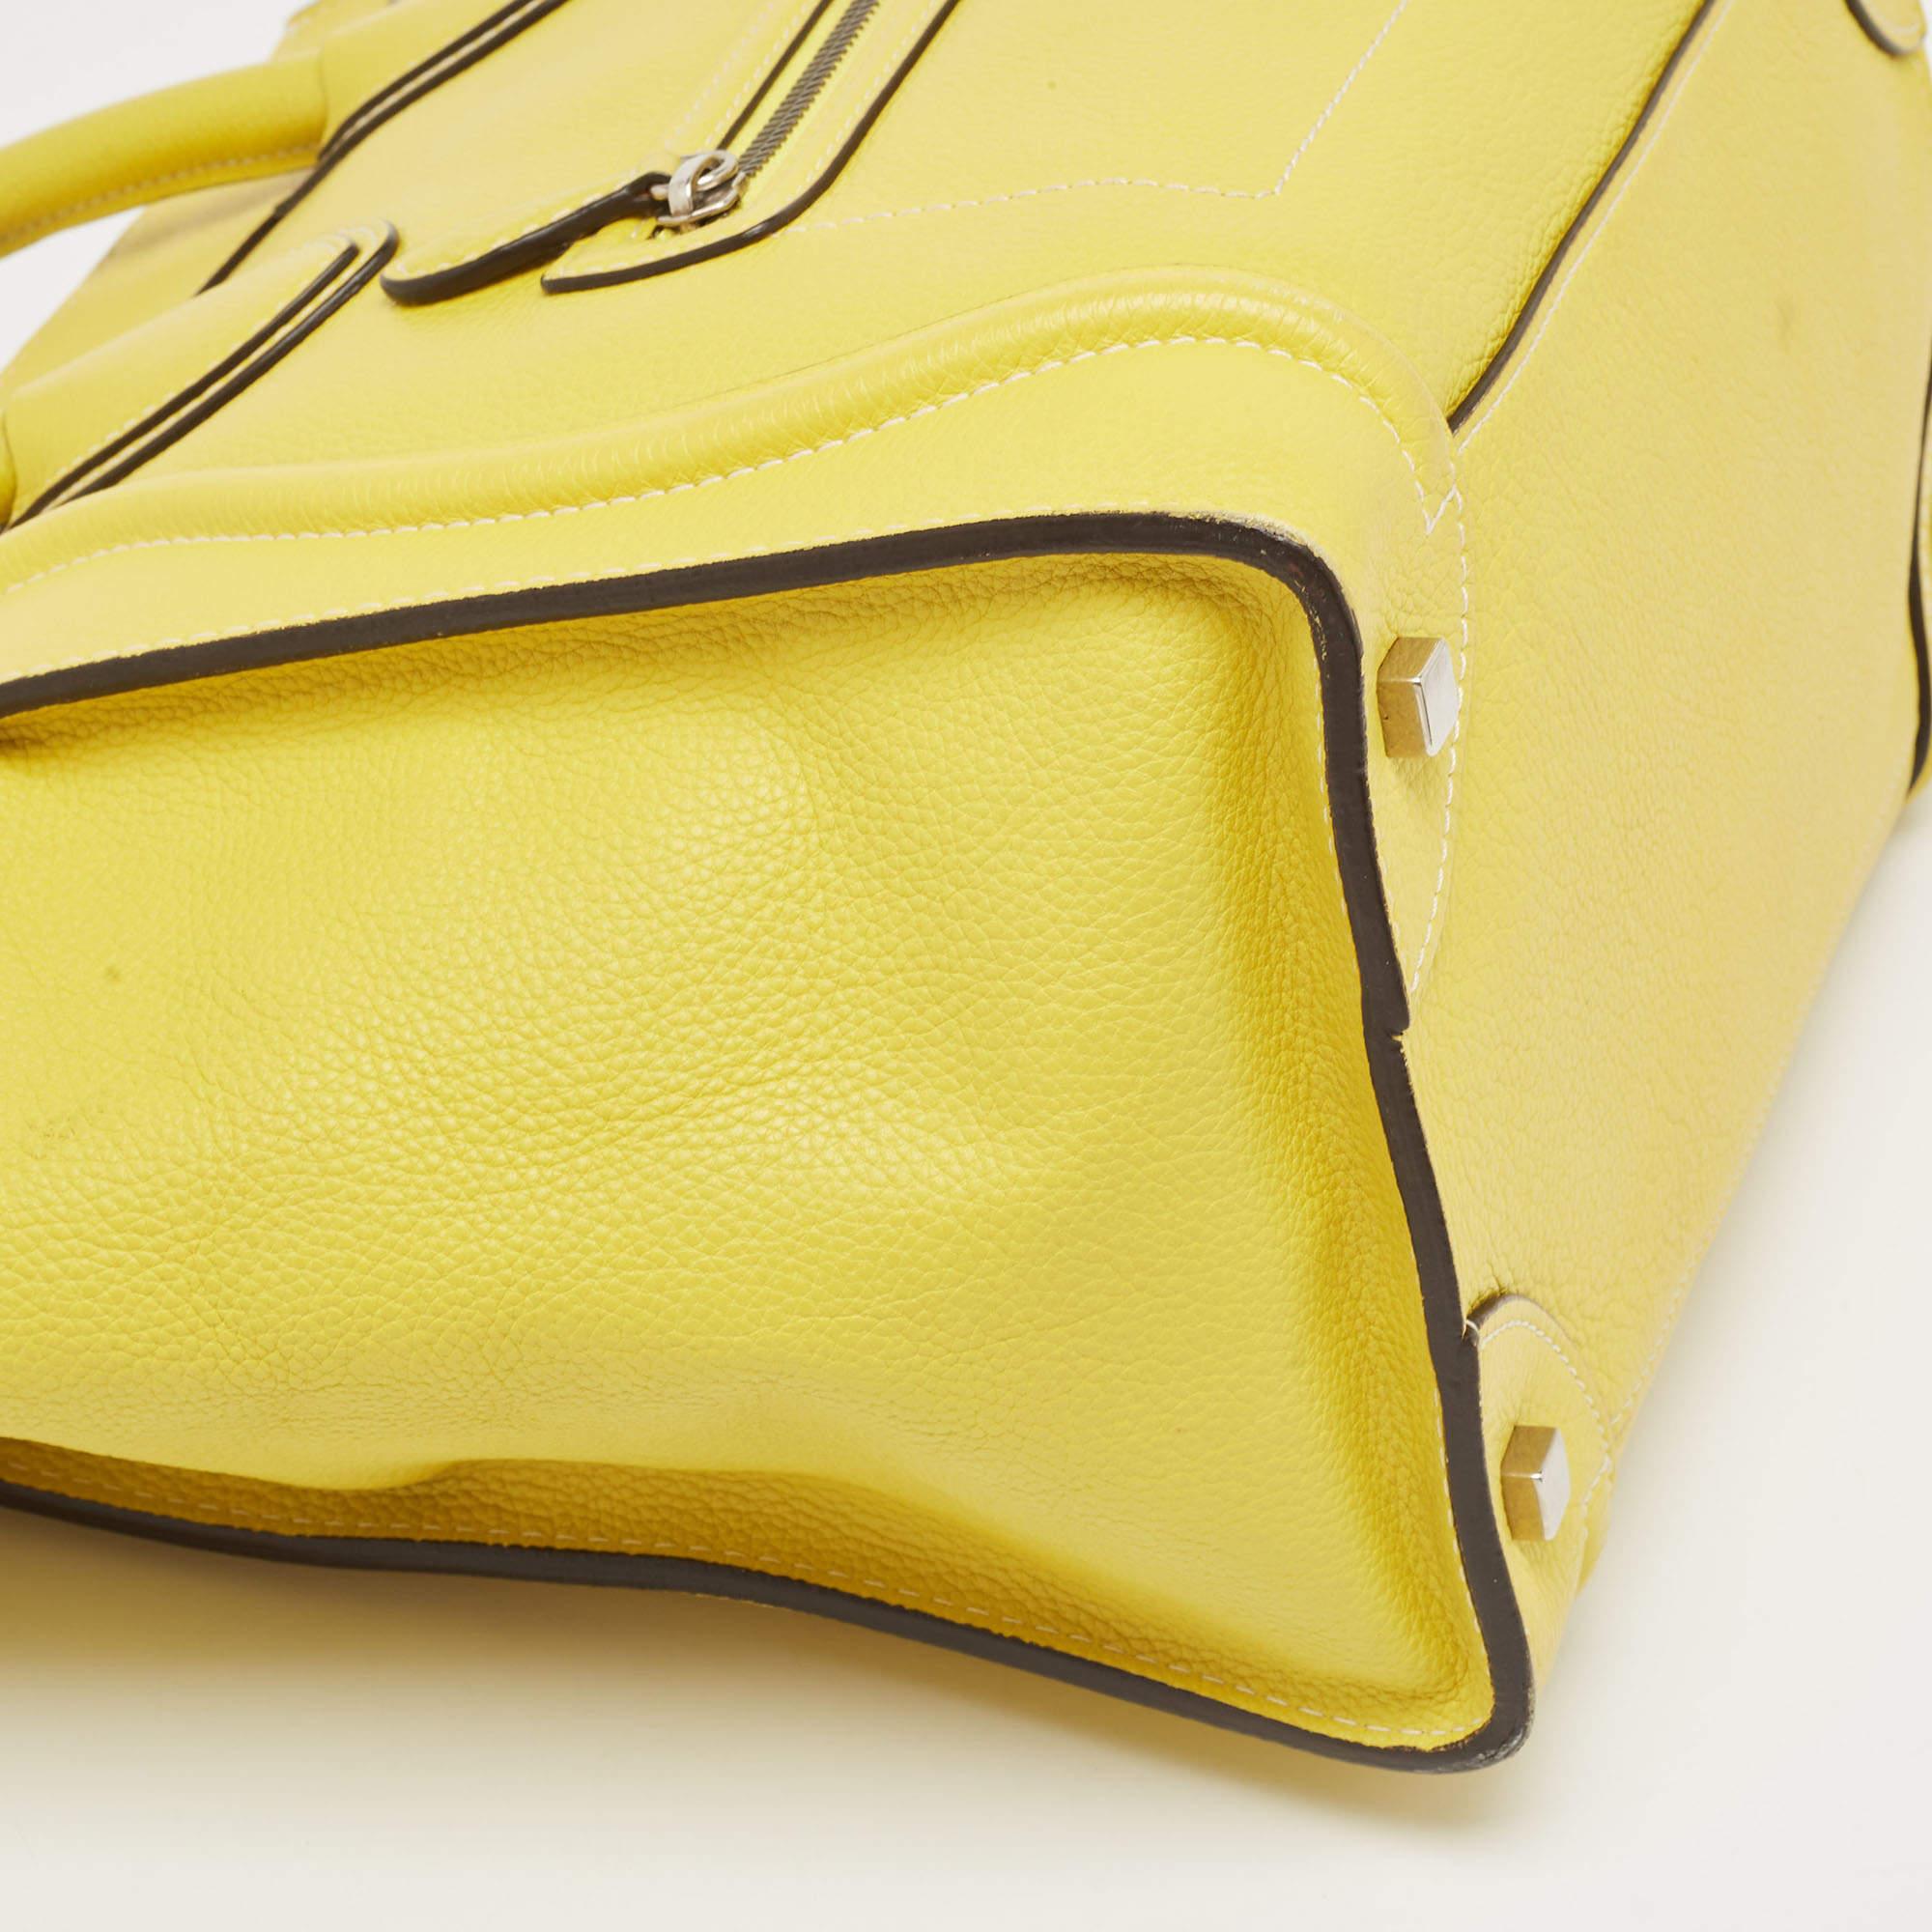 Celine Yellow Leather Mini Luggage Tote For Sale 8